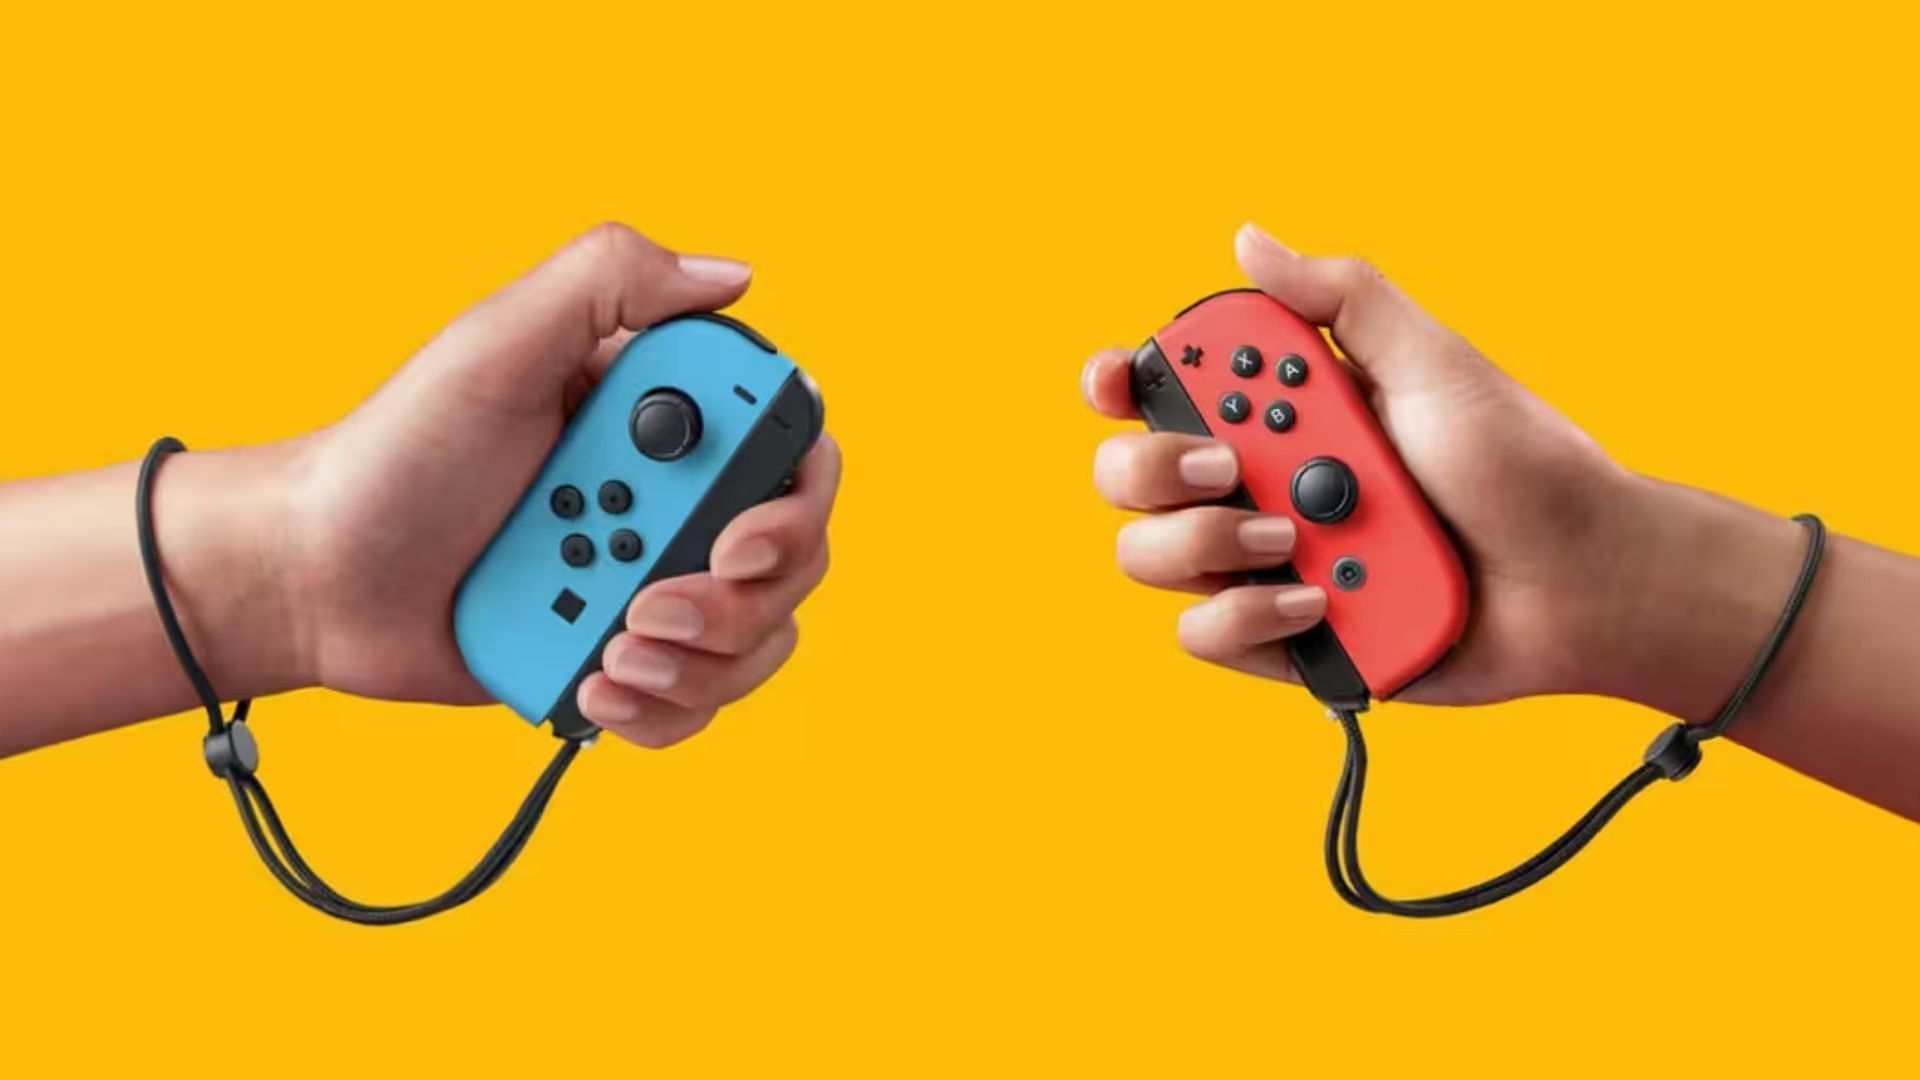 New Nintendo Switch 2 leaks suggest positive changes to the Joy-Con and overall console itself (Image via Nintendo)